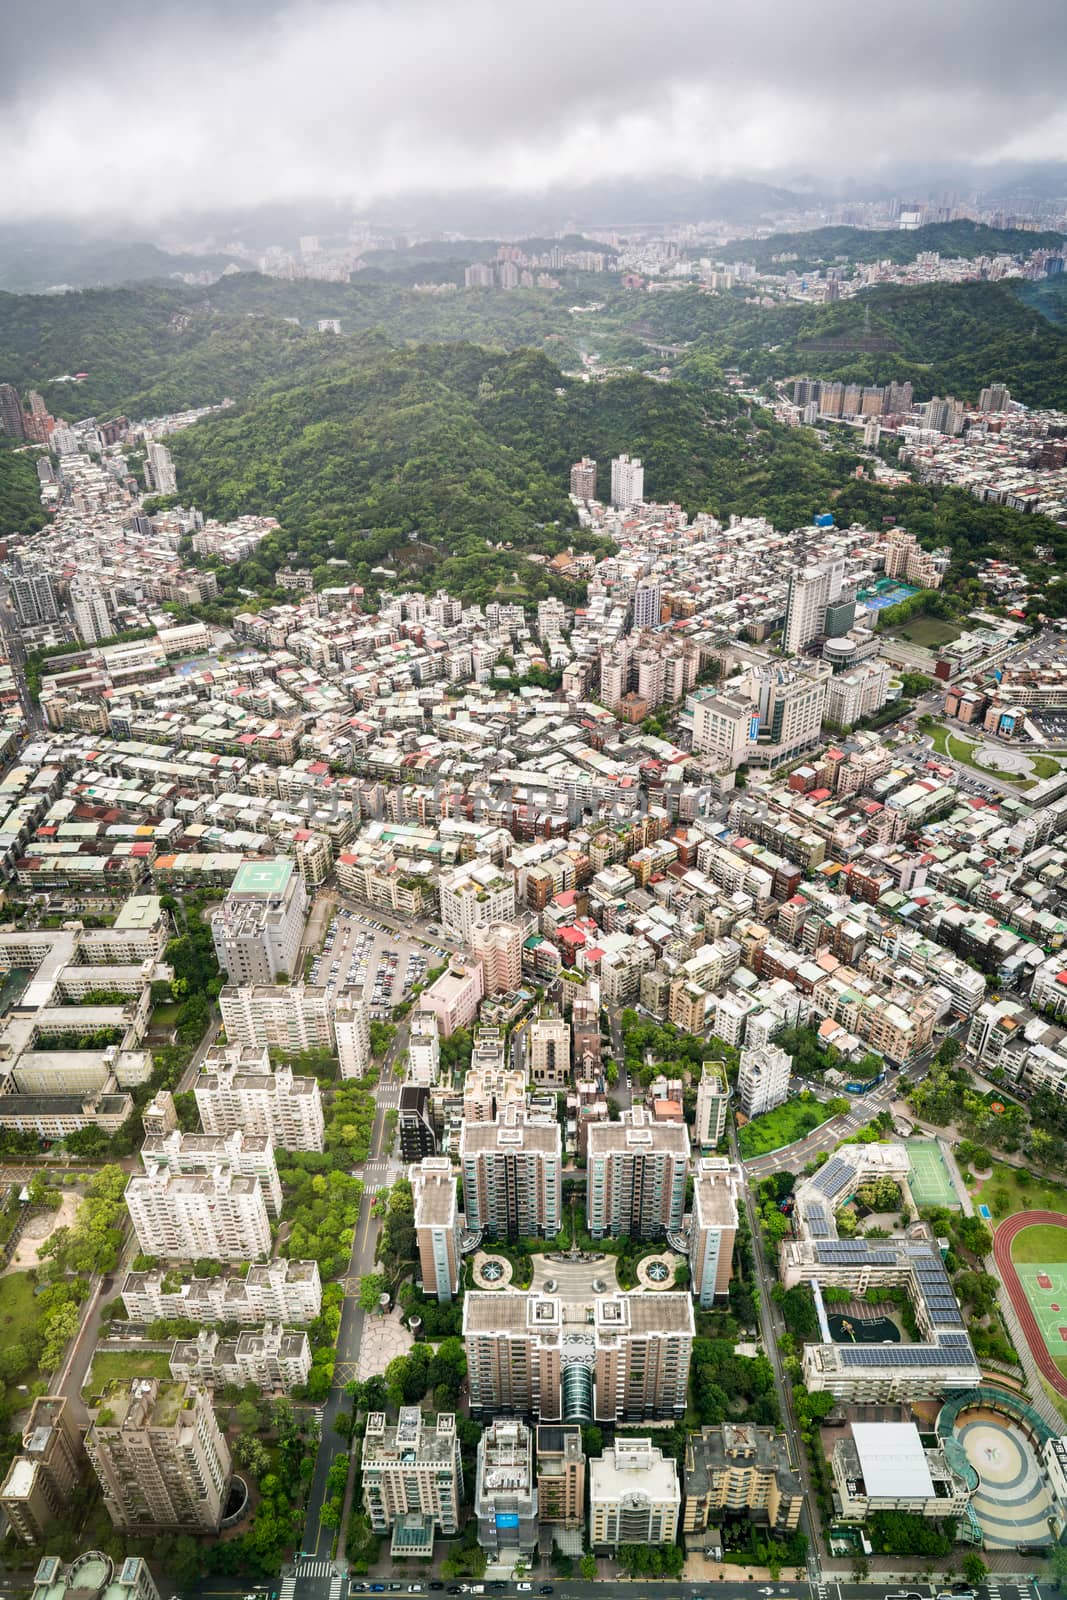 Aerial view of Taipei city from a skyscrapper